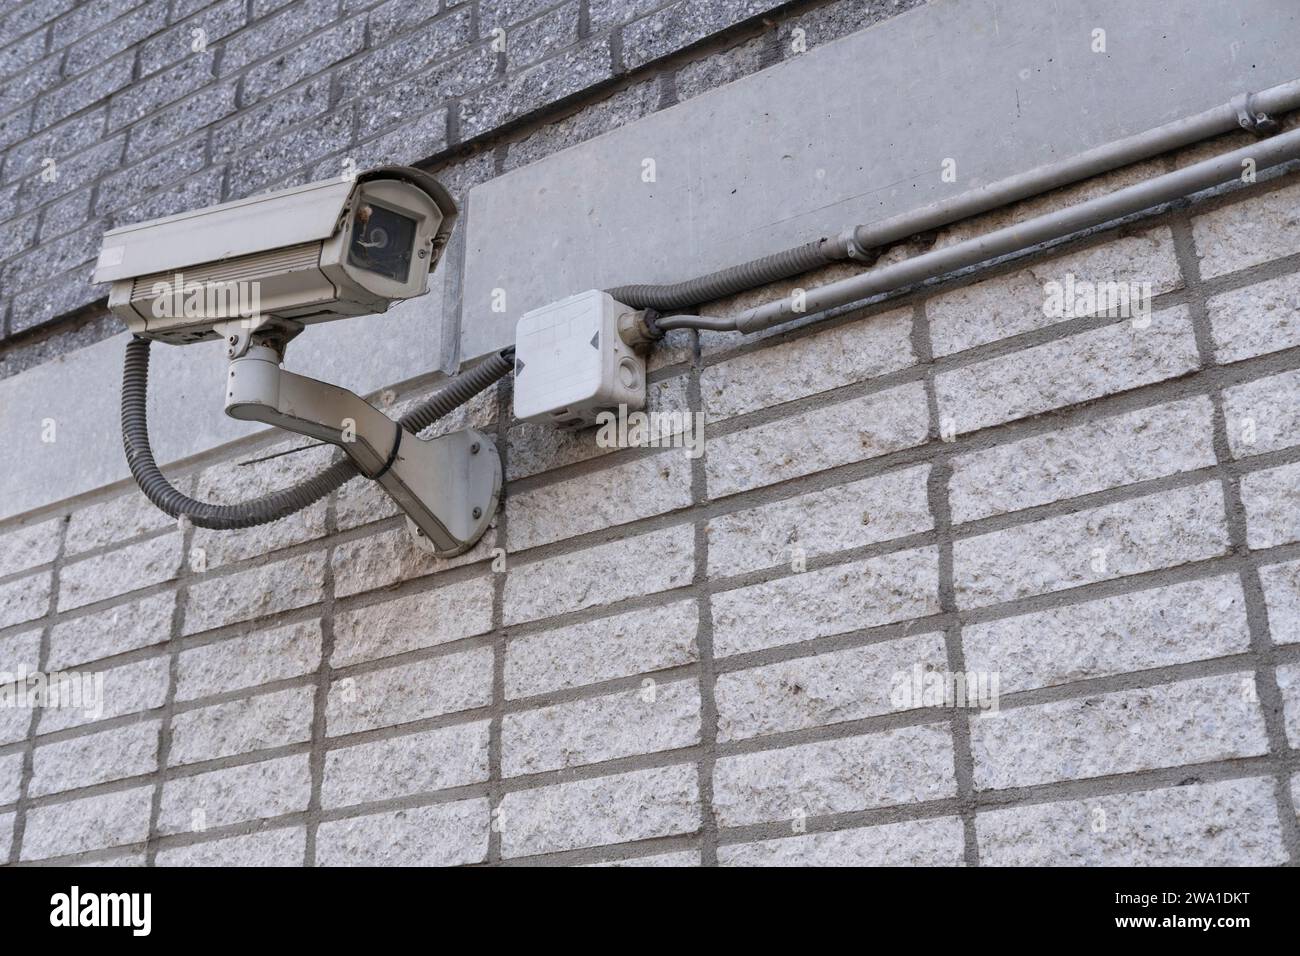 A somewhat dirty surveillance camera mounted on a wall to oversee the street Stock Photo